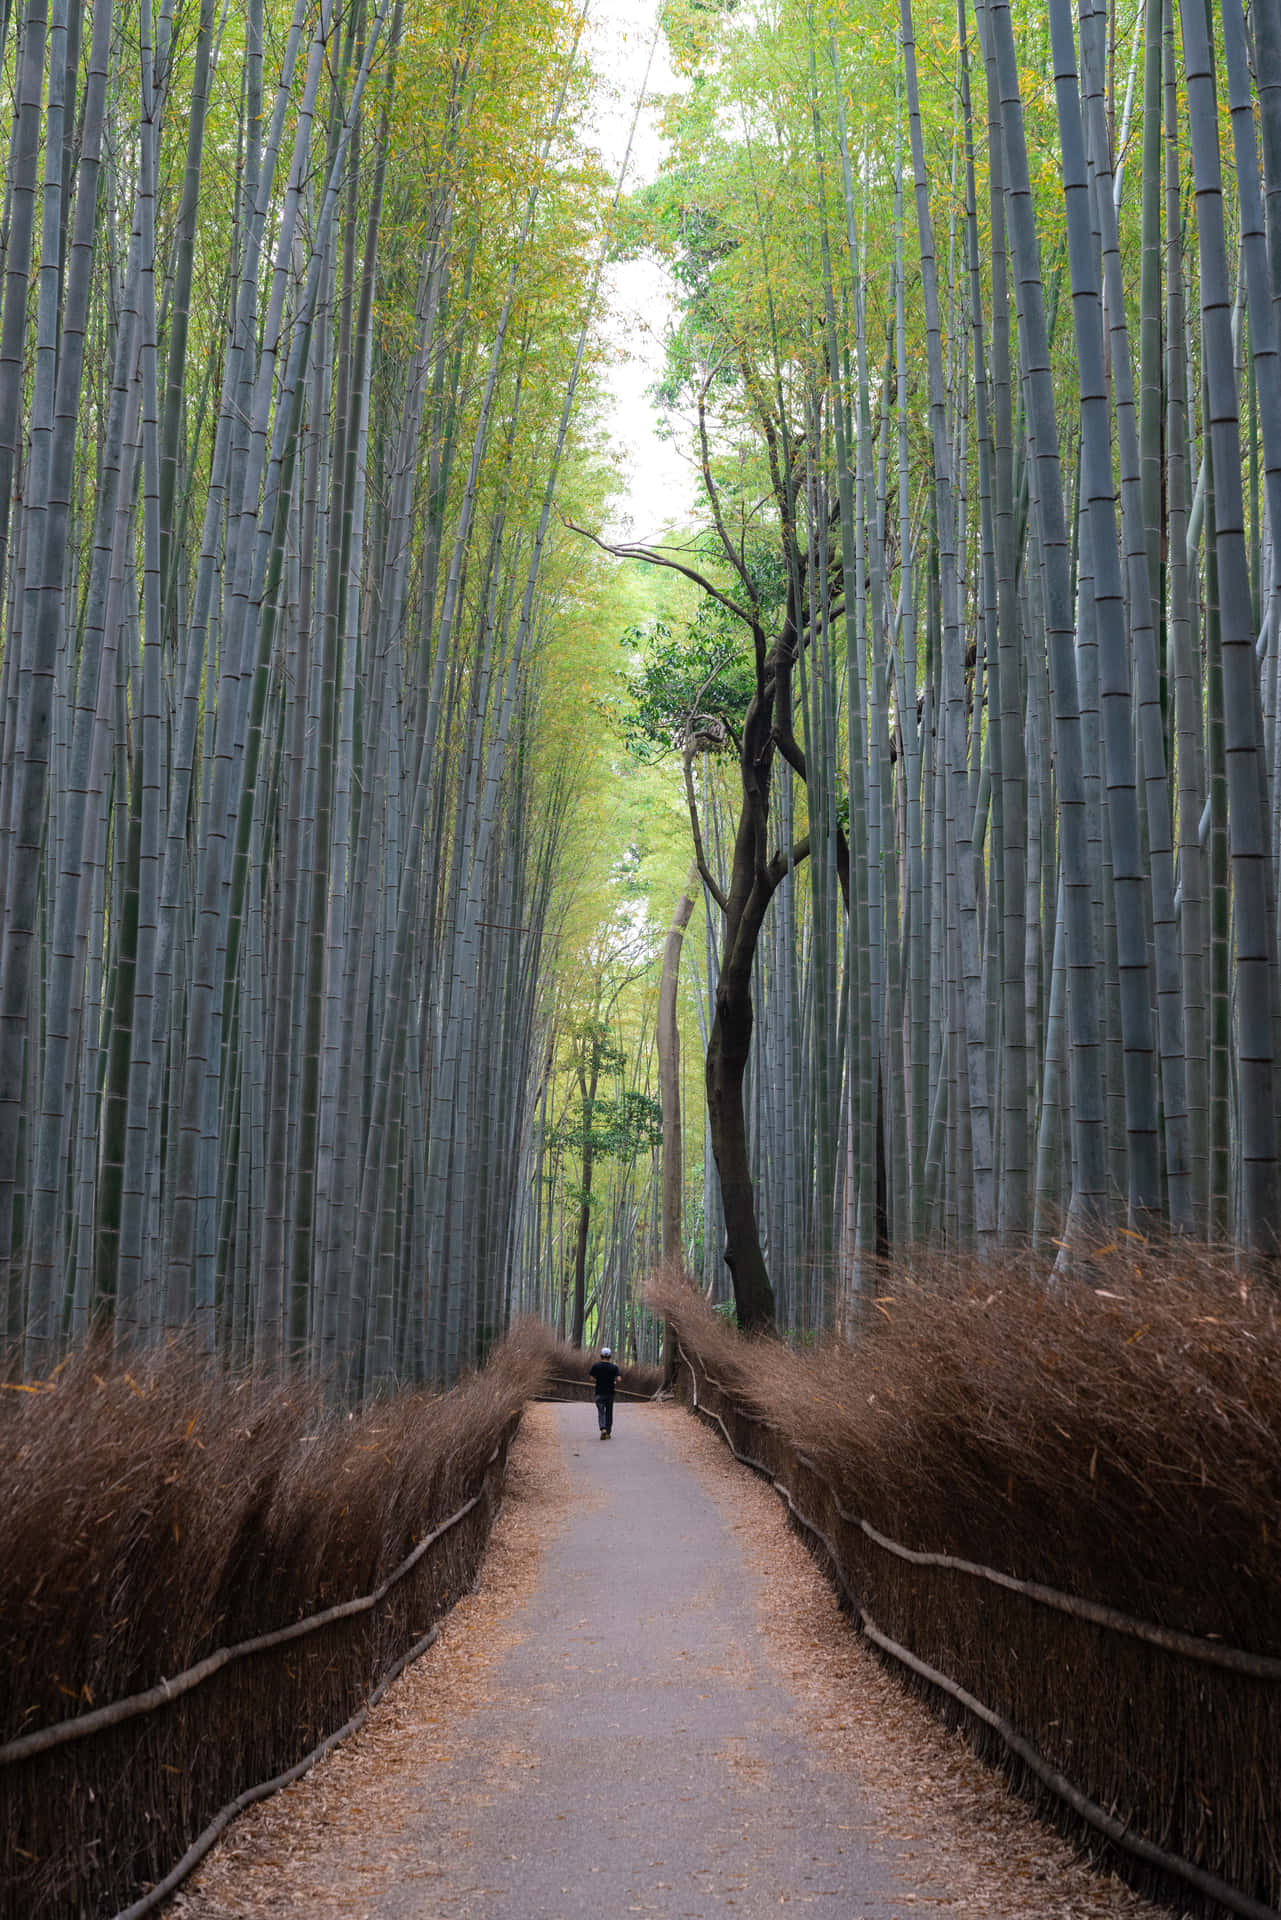 Man In Bamboo Forest